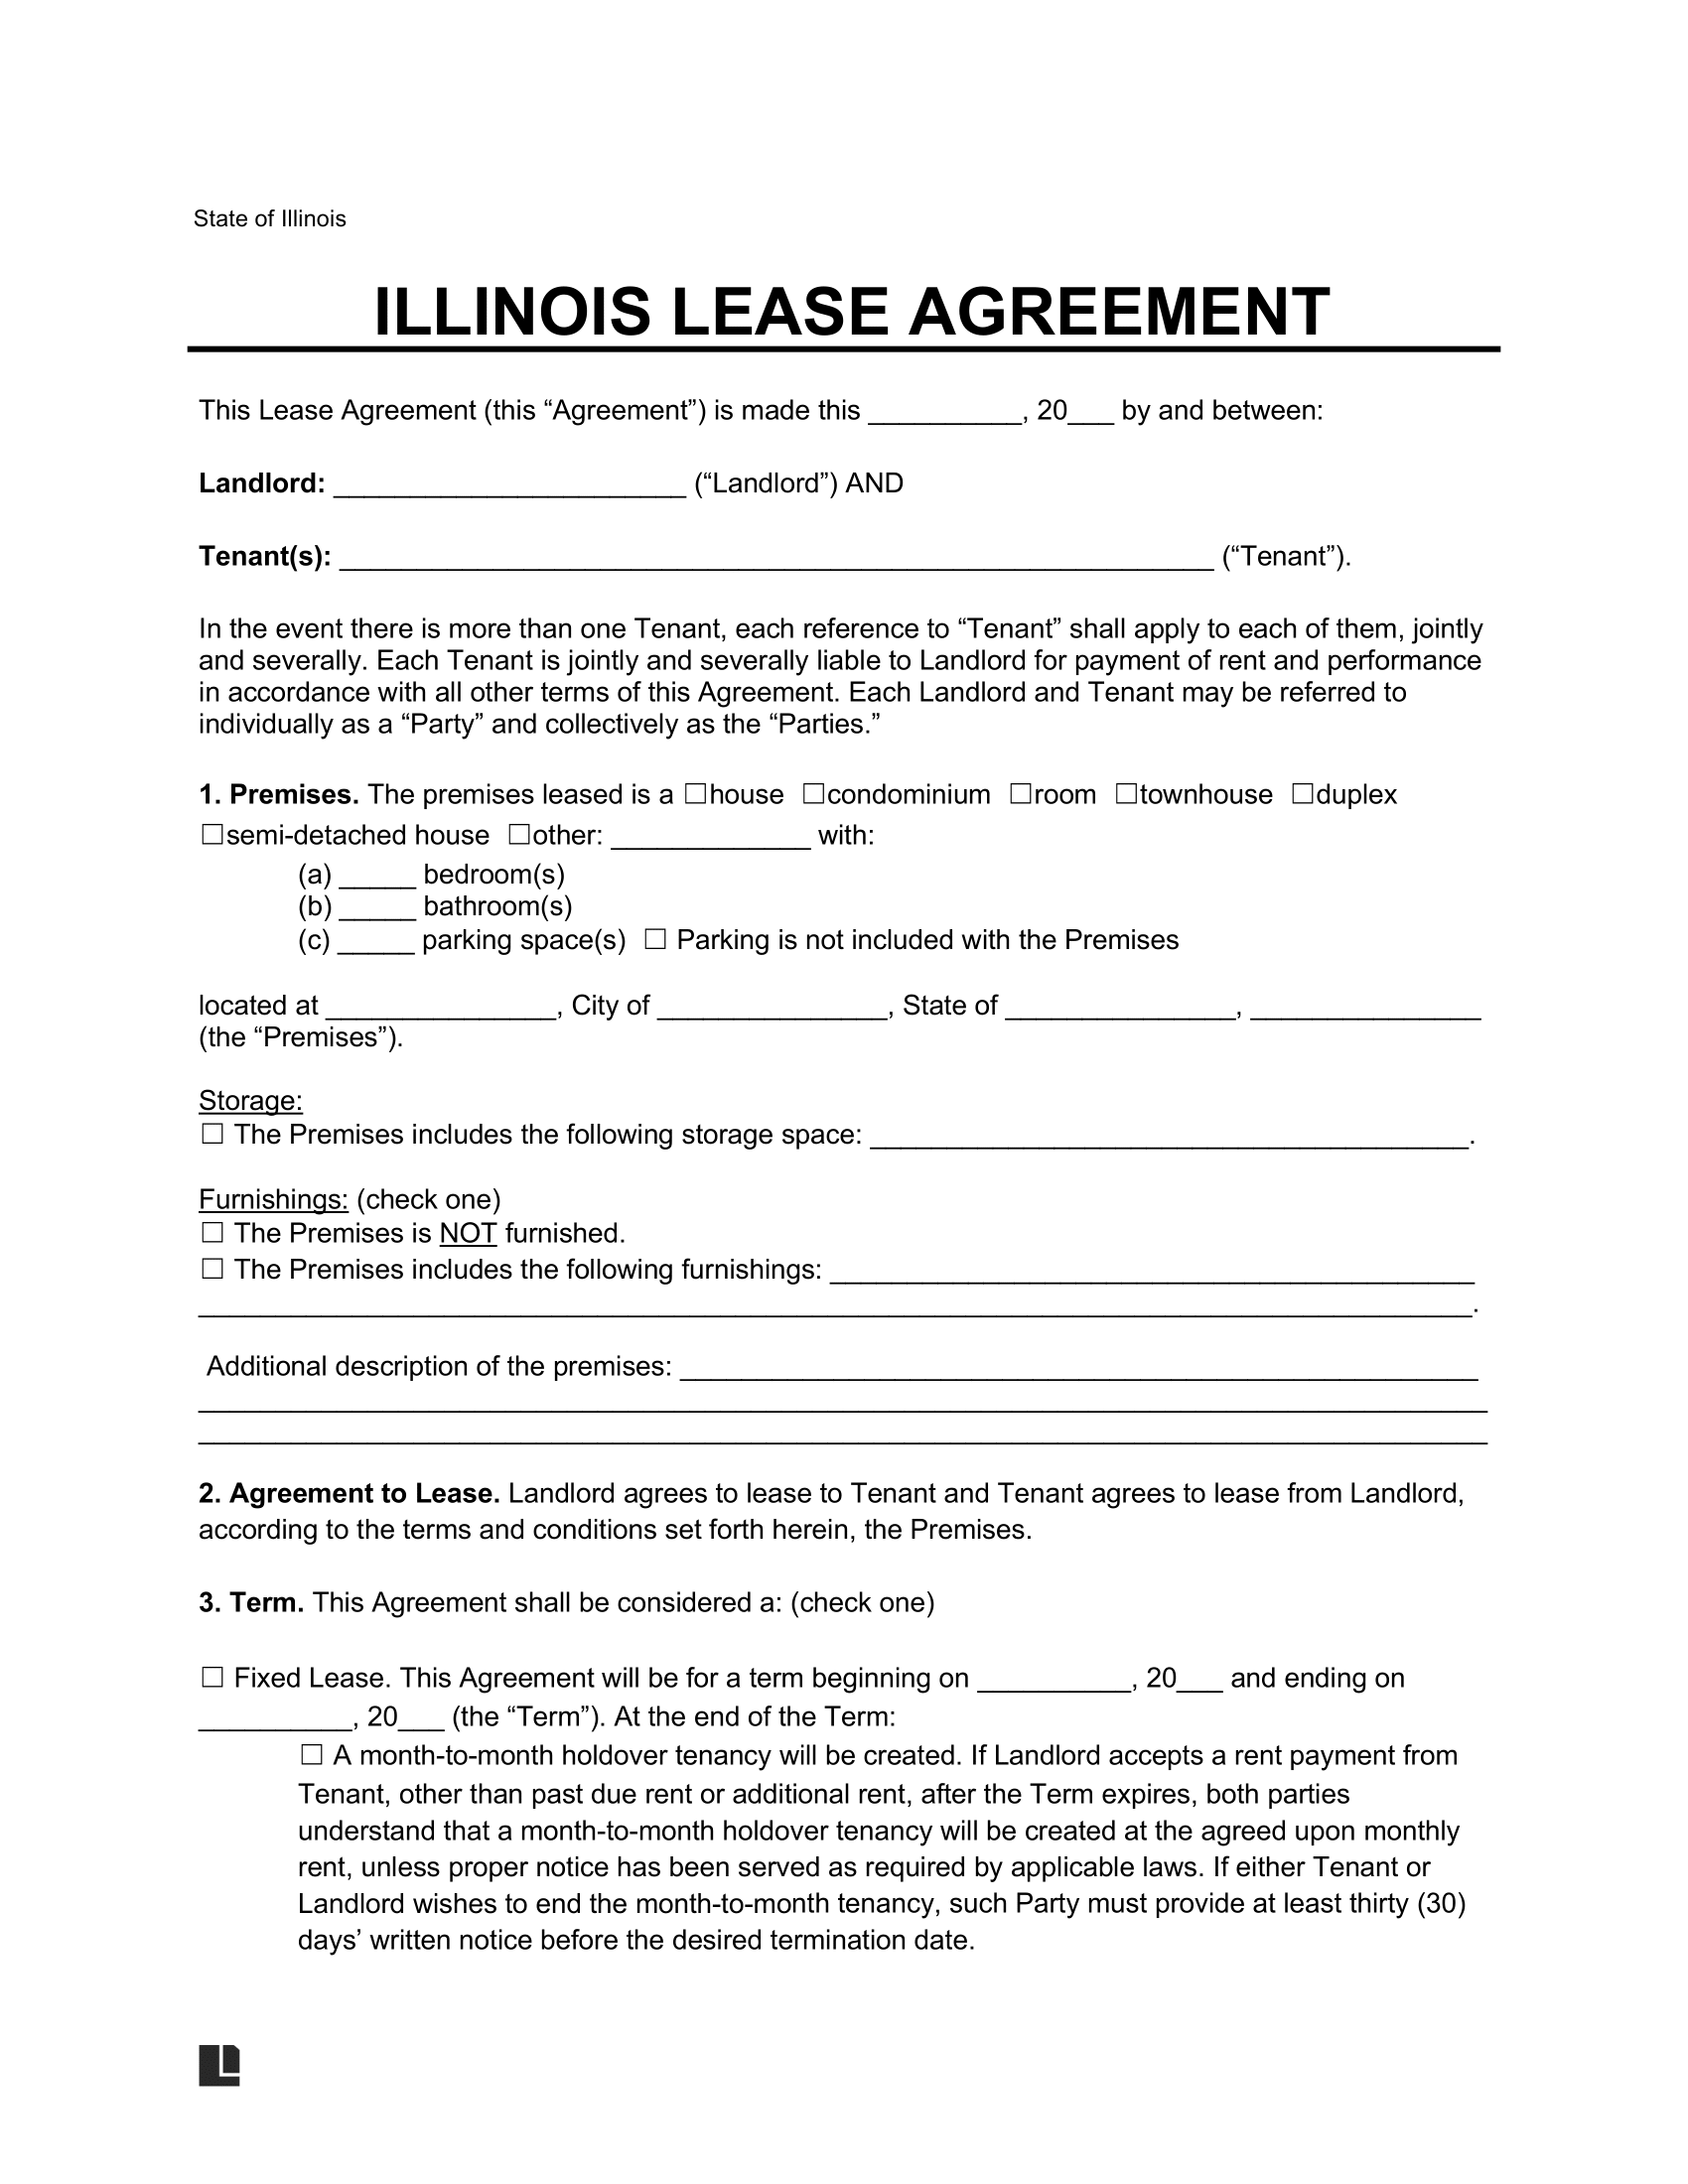 llinois Residential Lease Agreement Template